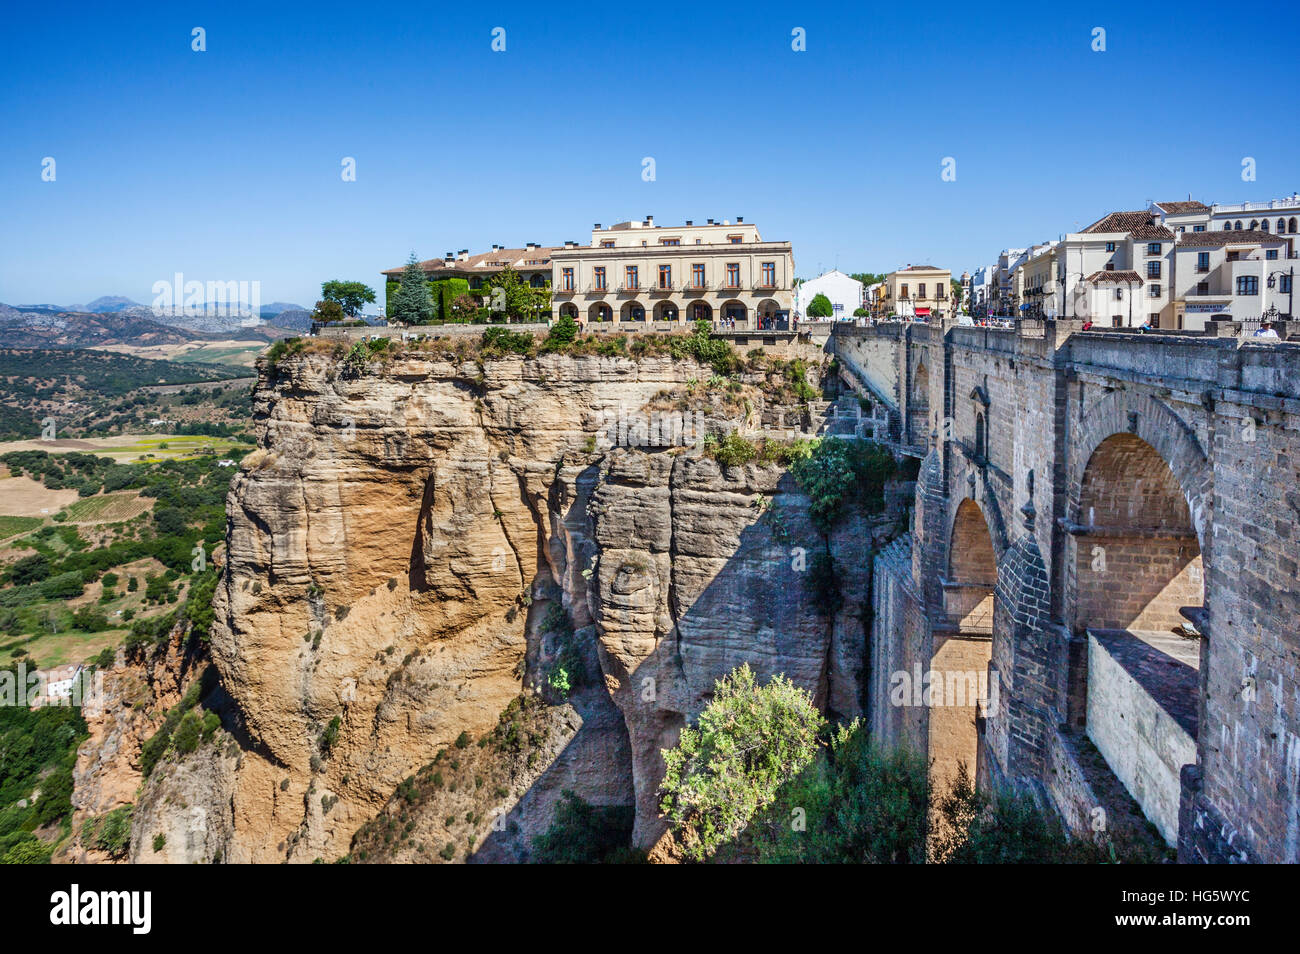 Spain, Andalusia, Province of Malaga, Ronda, Puente Nueva spanning the divide of the El Tajo Gorge, with view of La Ciudad, the Old Town Stock Photo